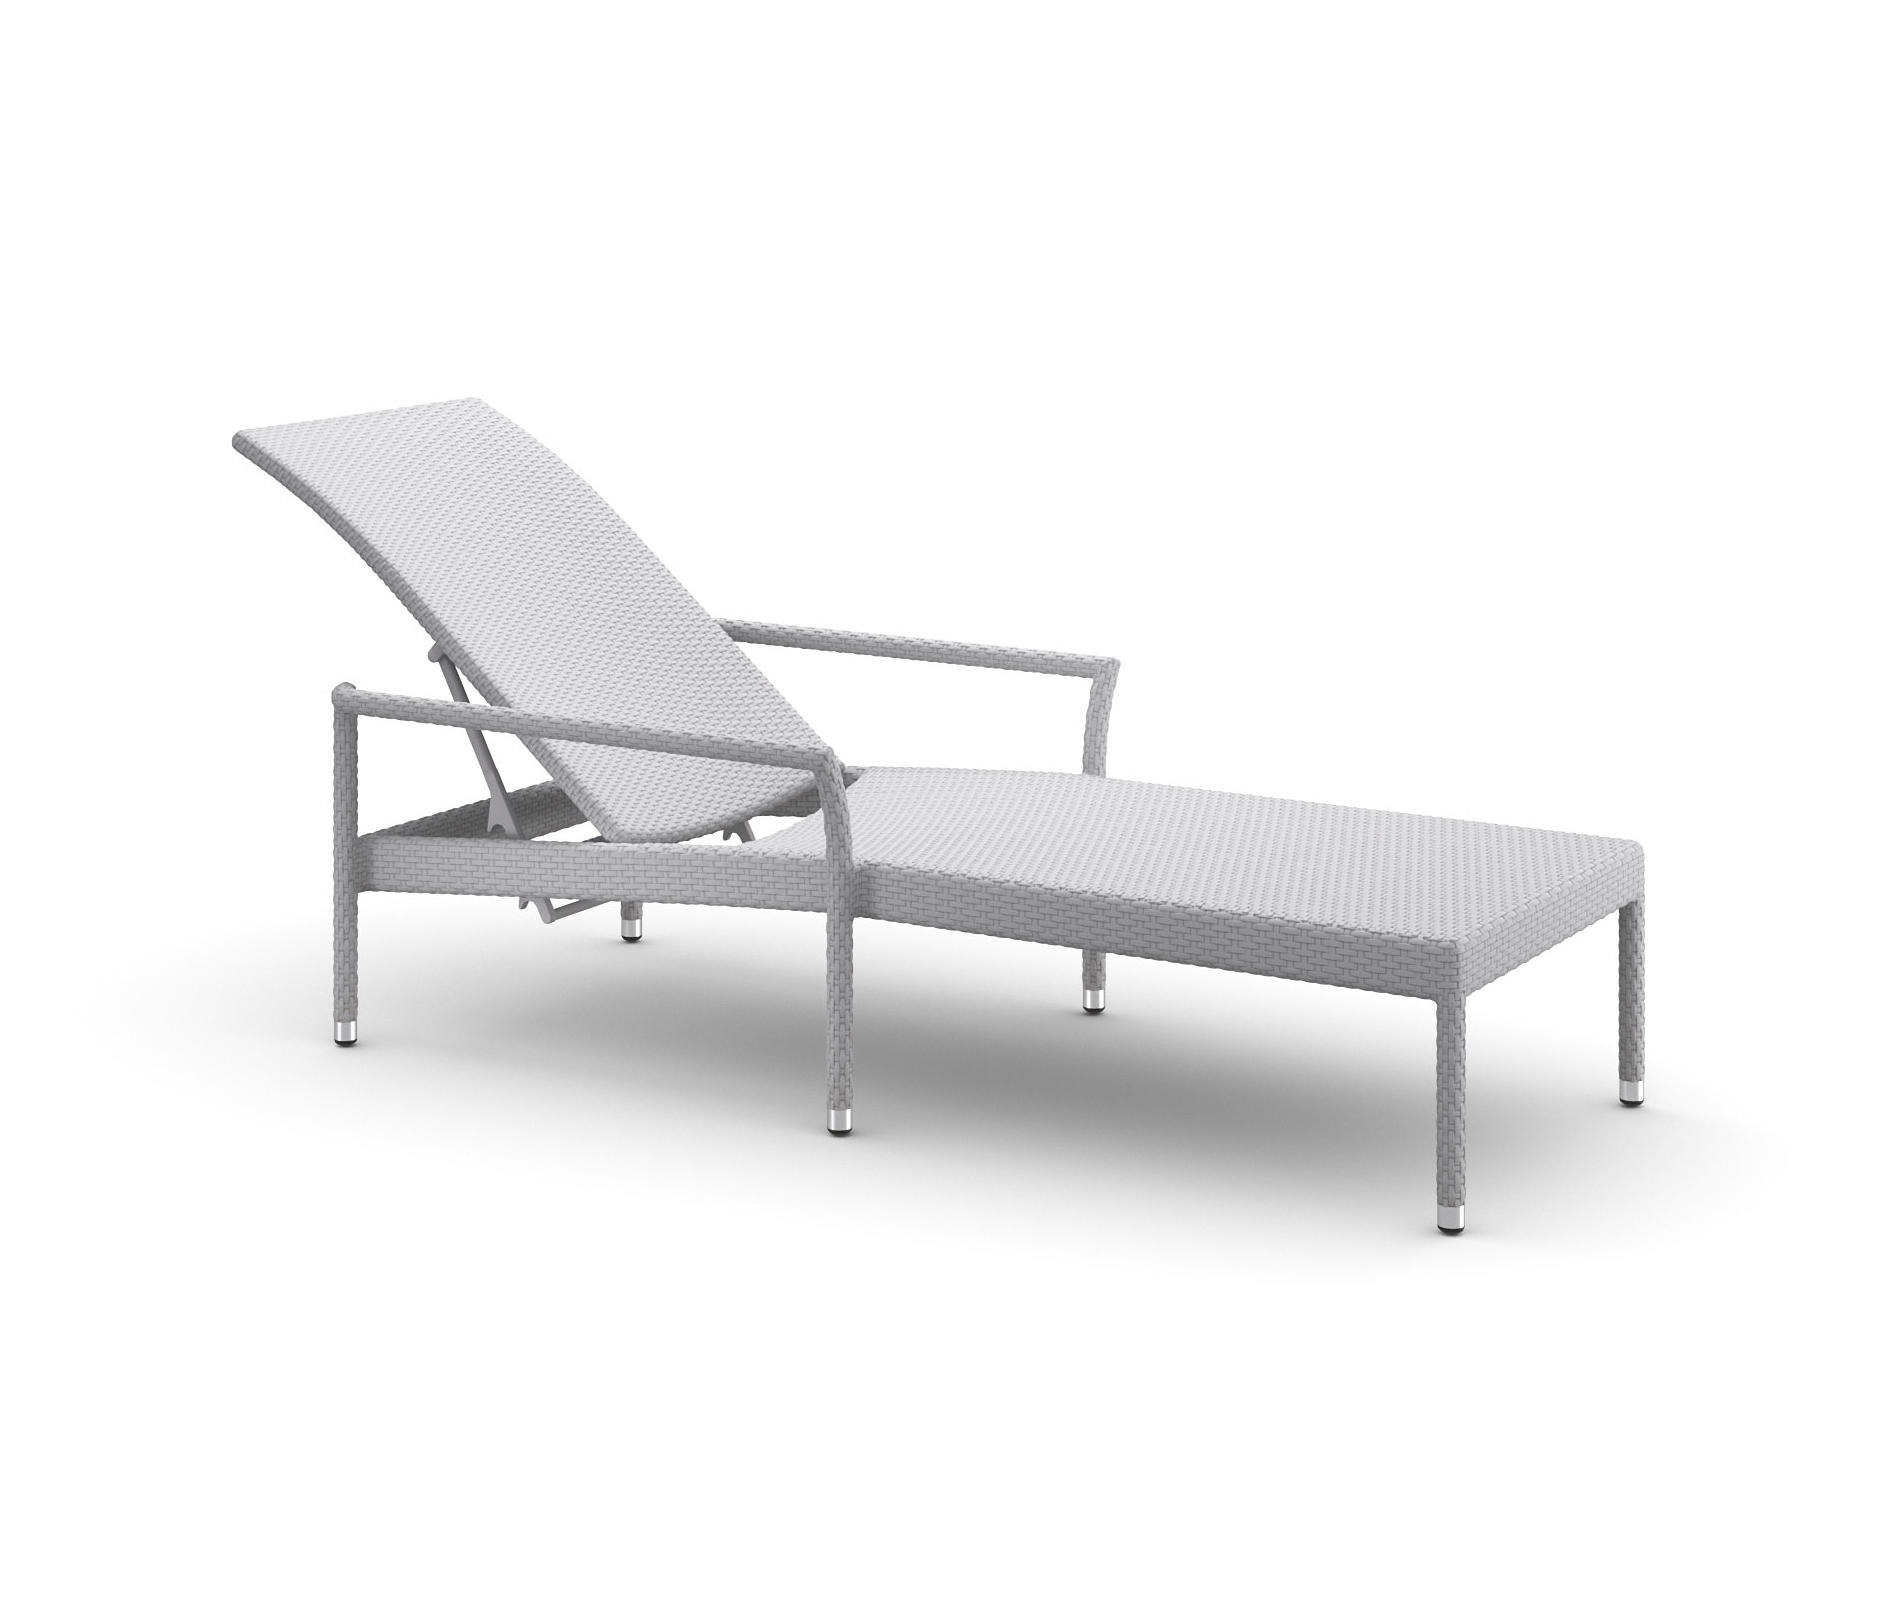 HOLIDAY Beach Chair & designer furniture | Architonic